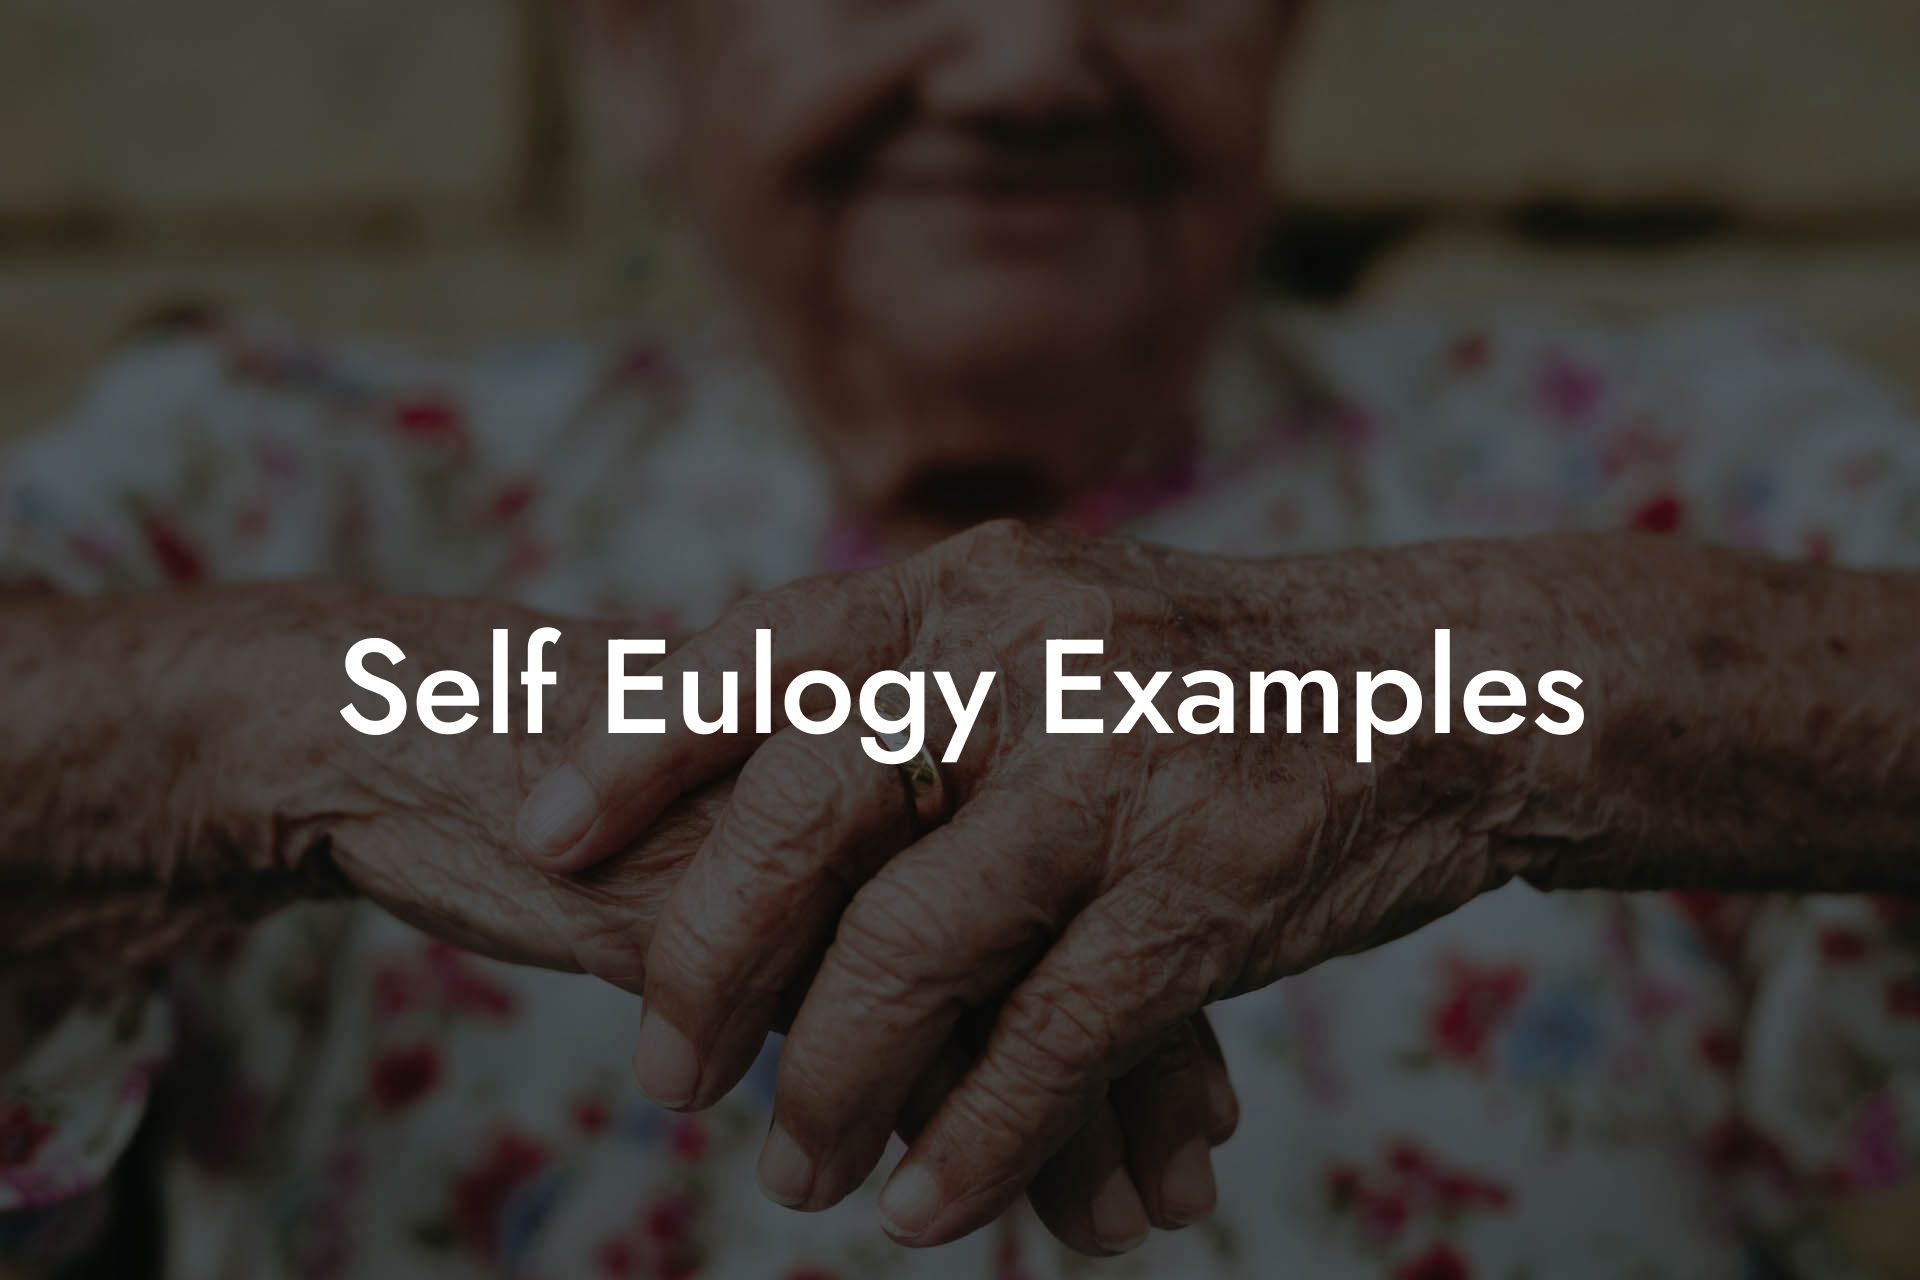 Self Eulogy Examples